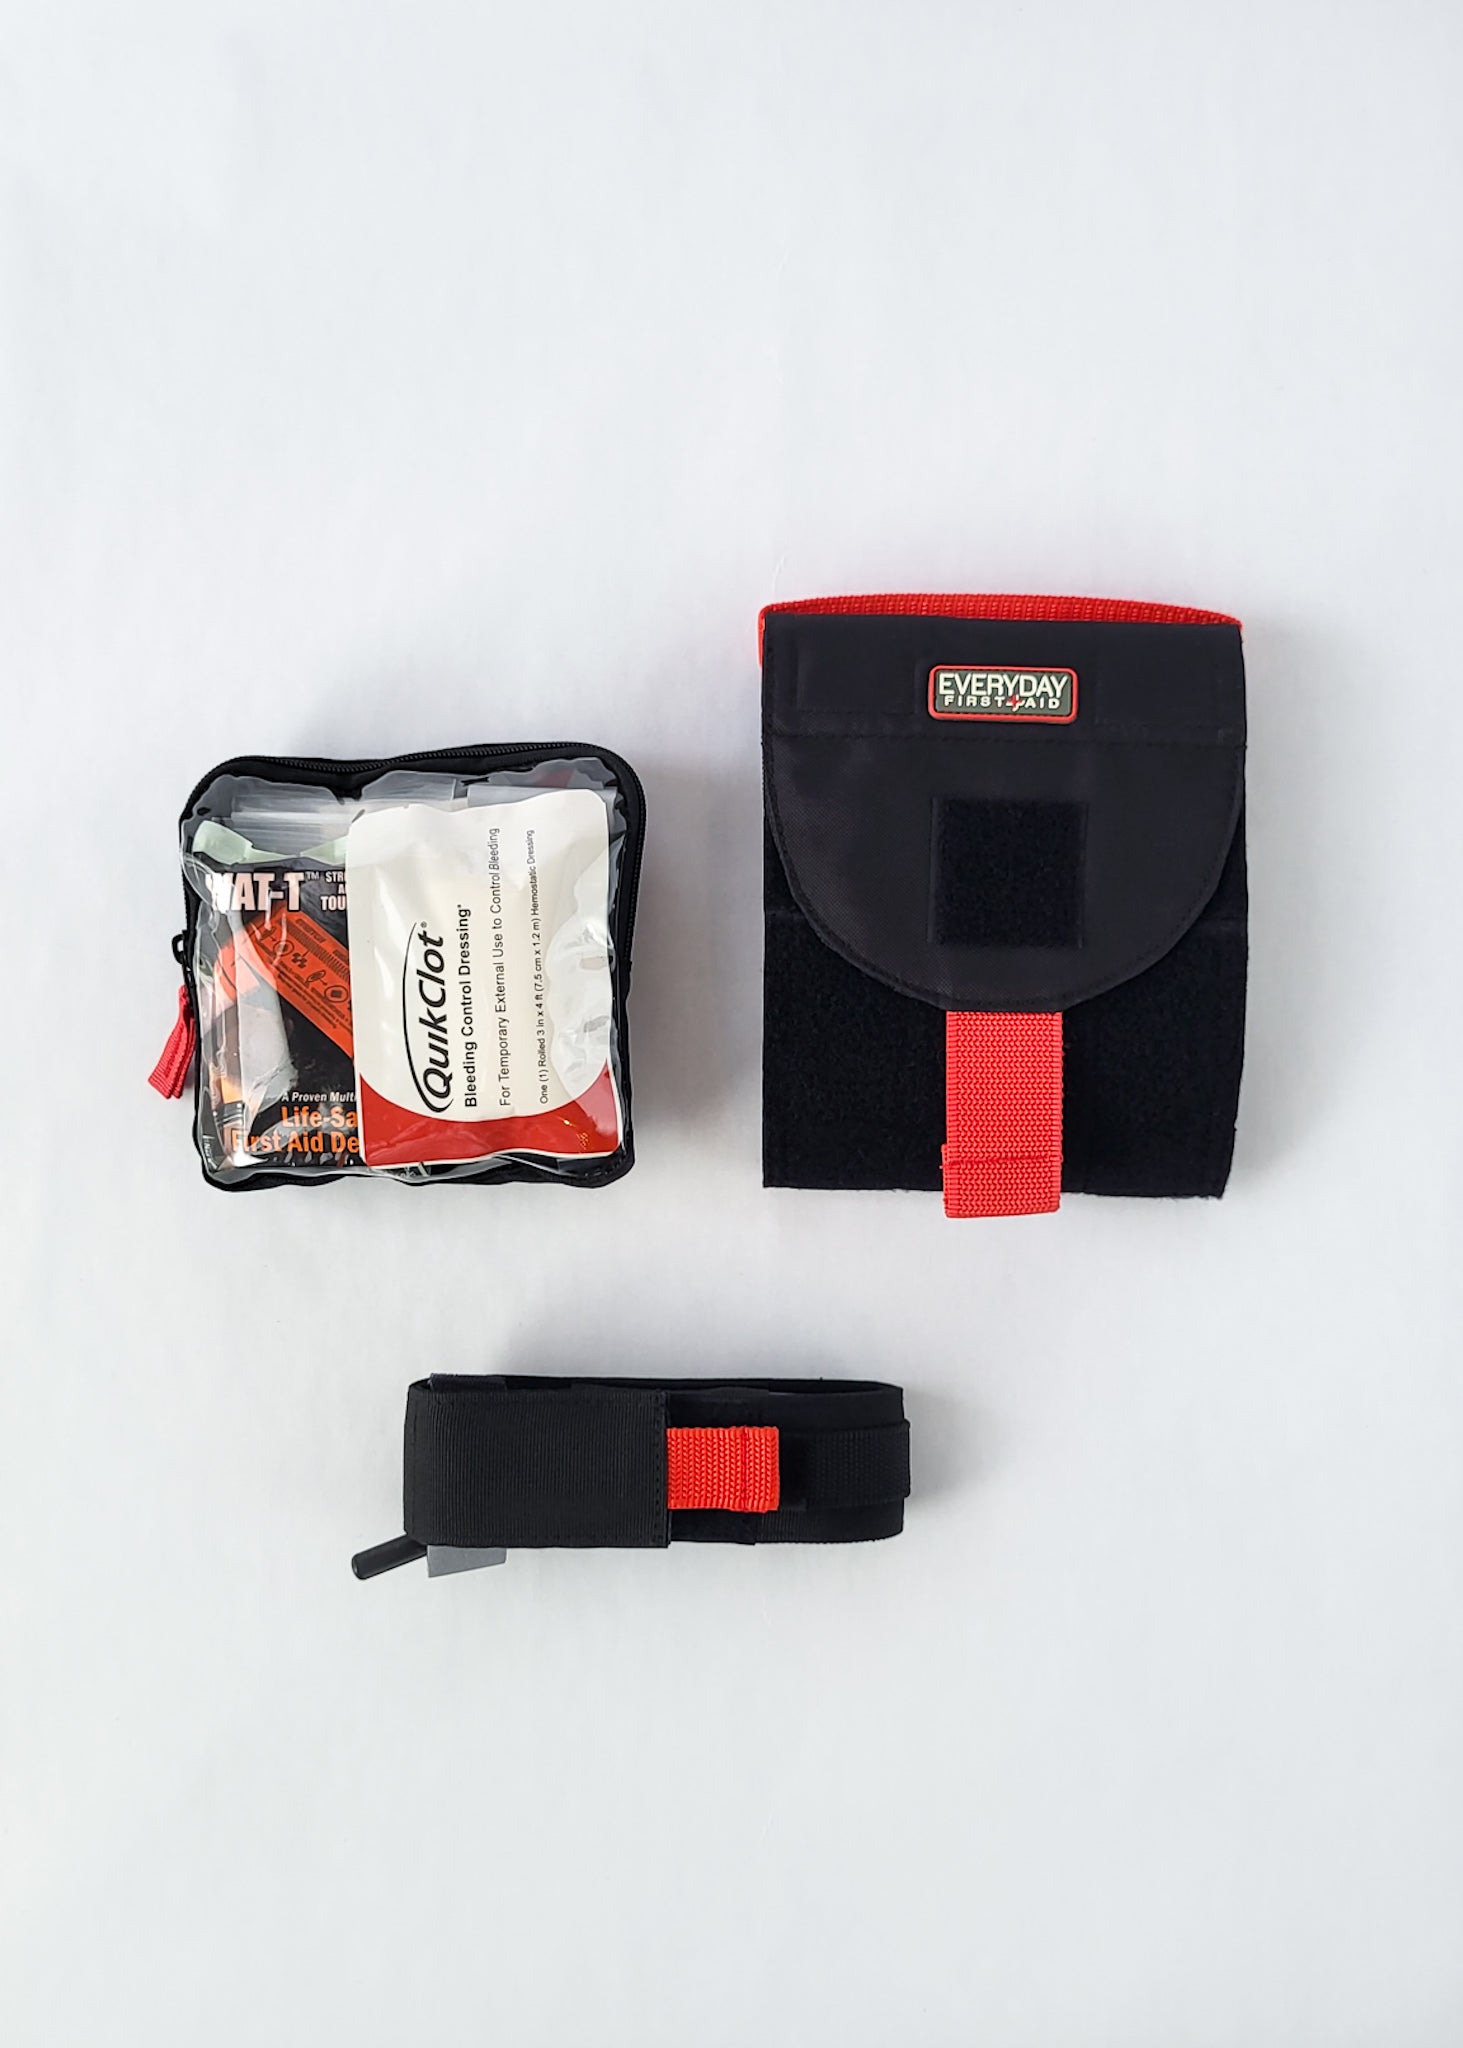 Trauma Kit with CAT tourniquet pouch out